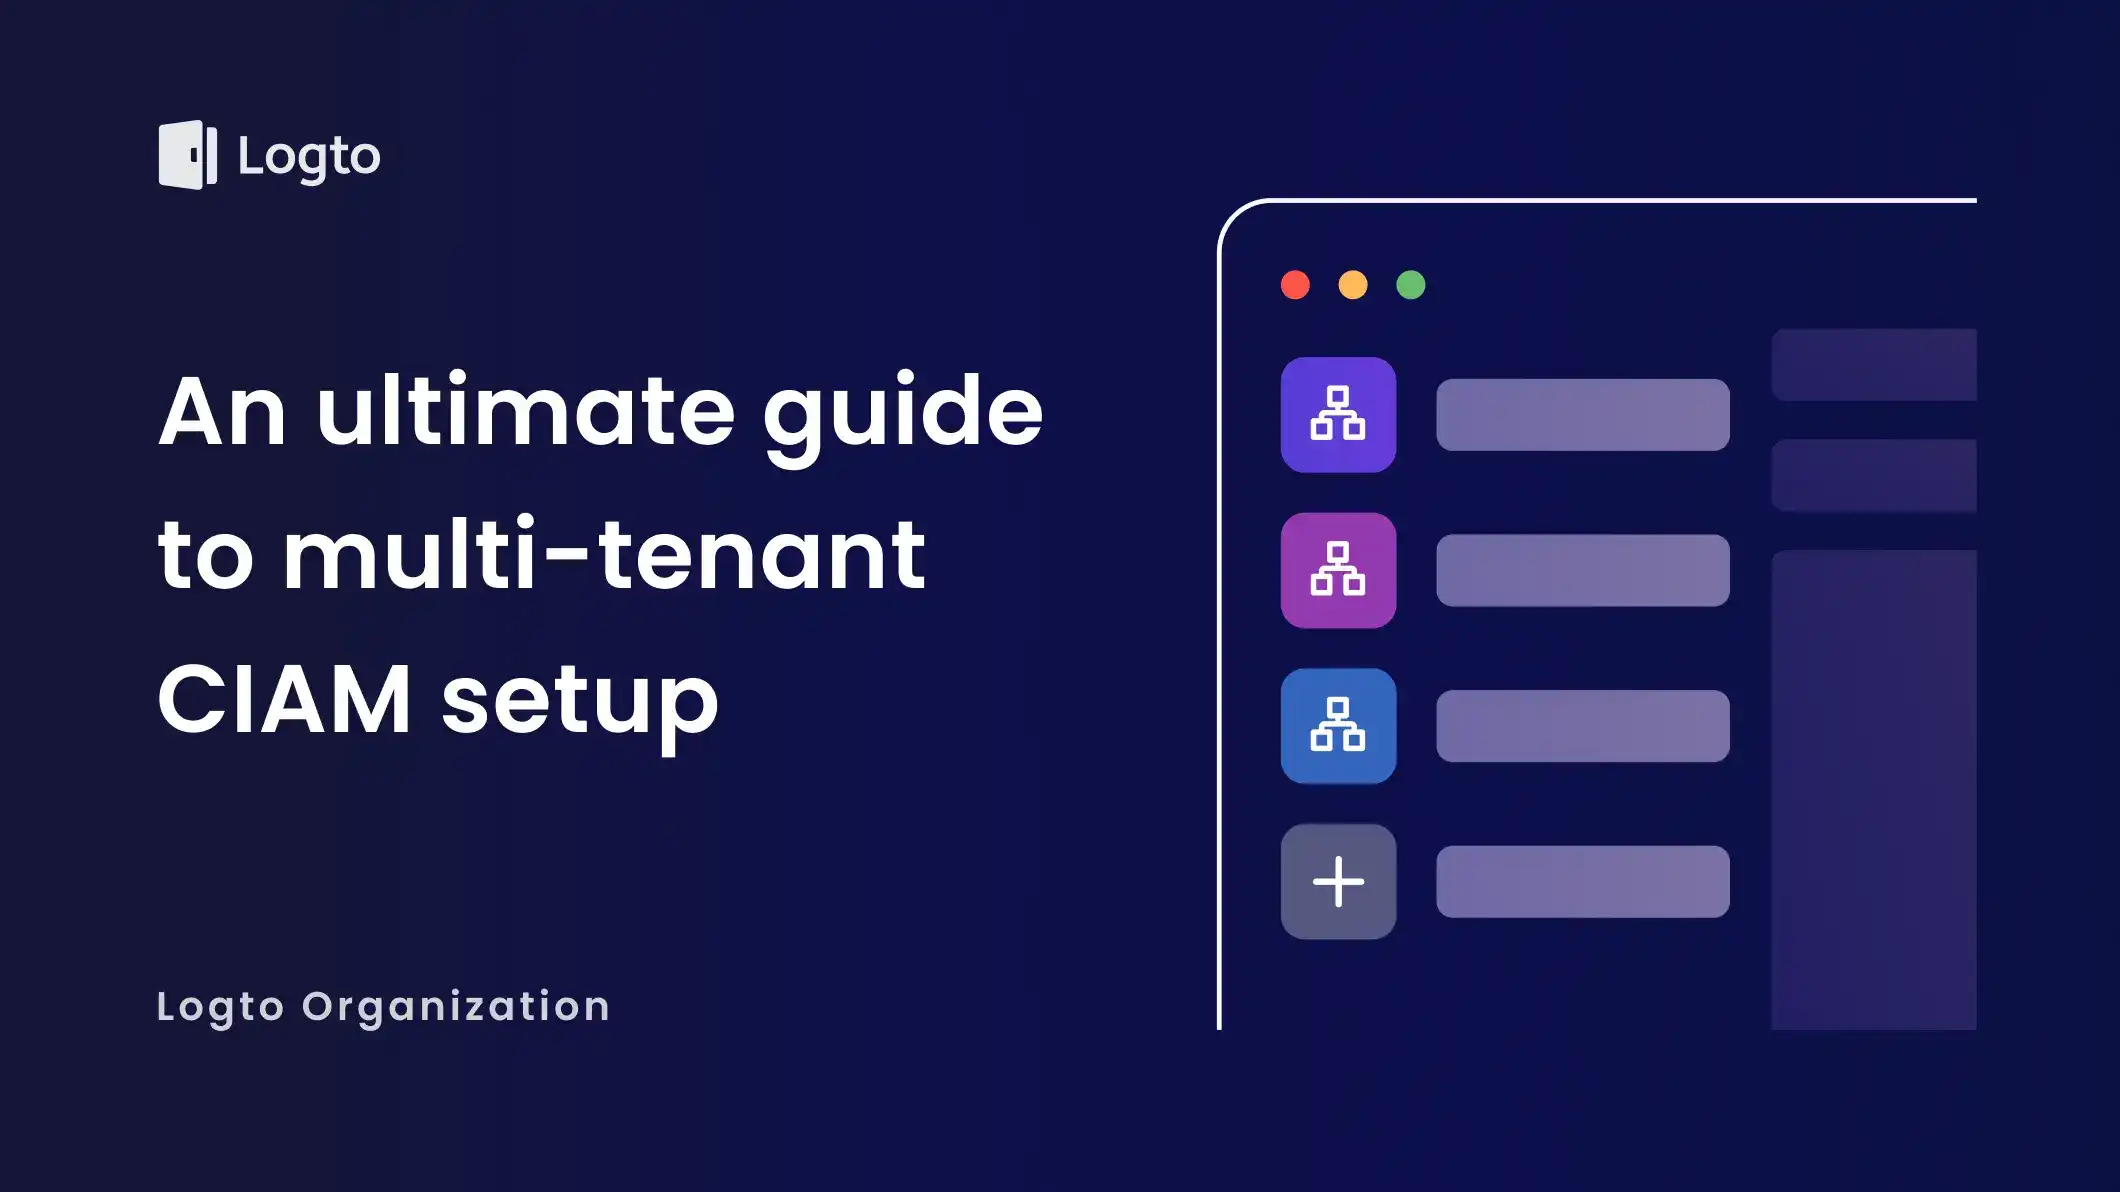 An ultimate guide to multi-tenant CIAM setup